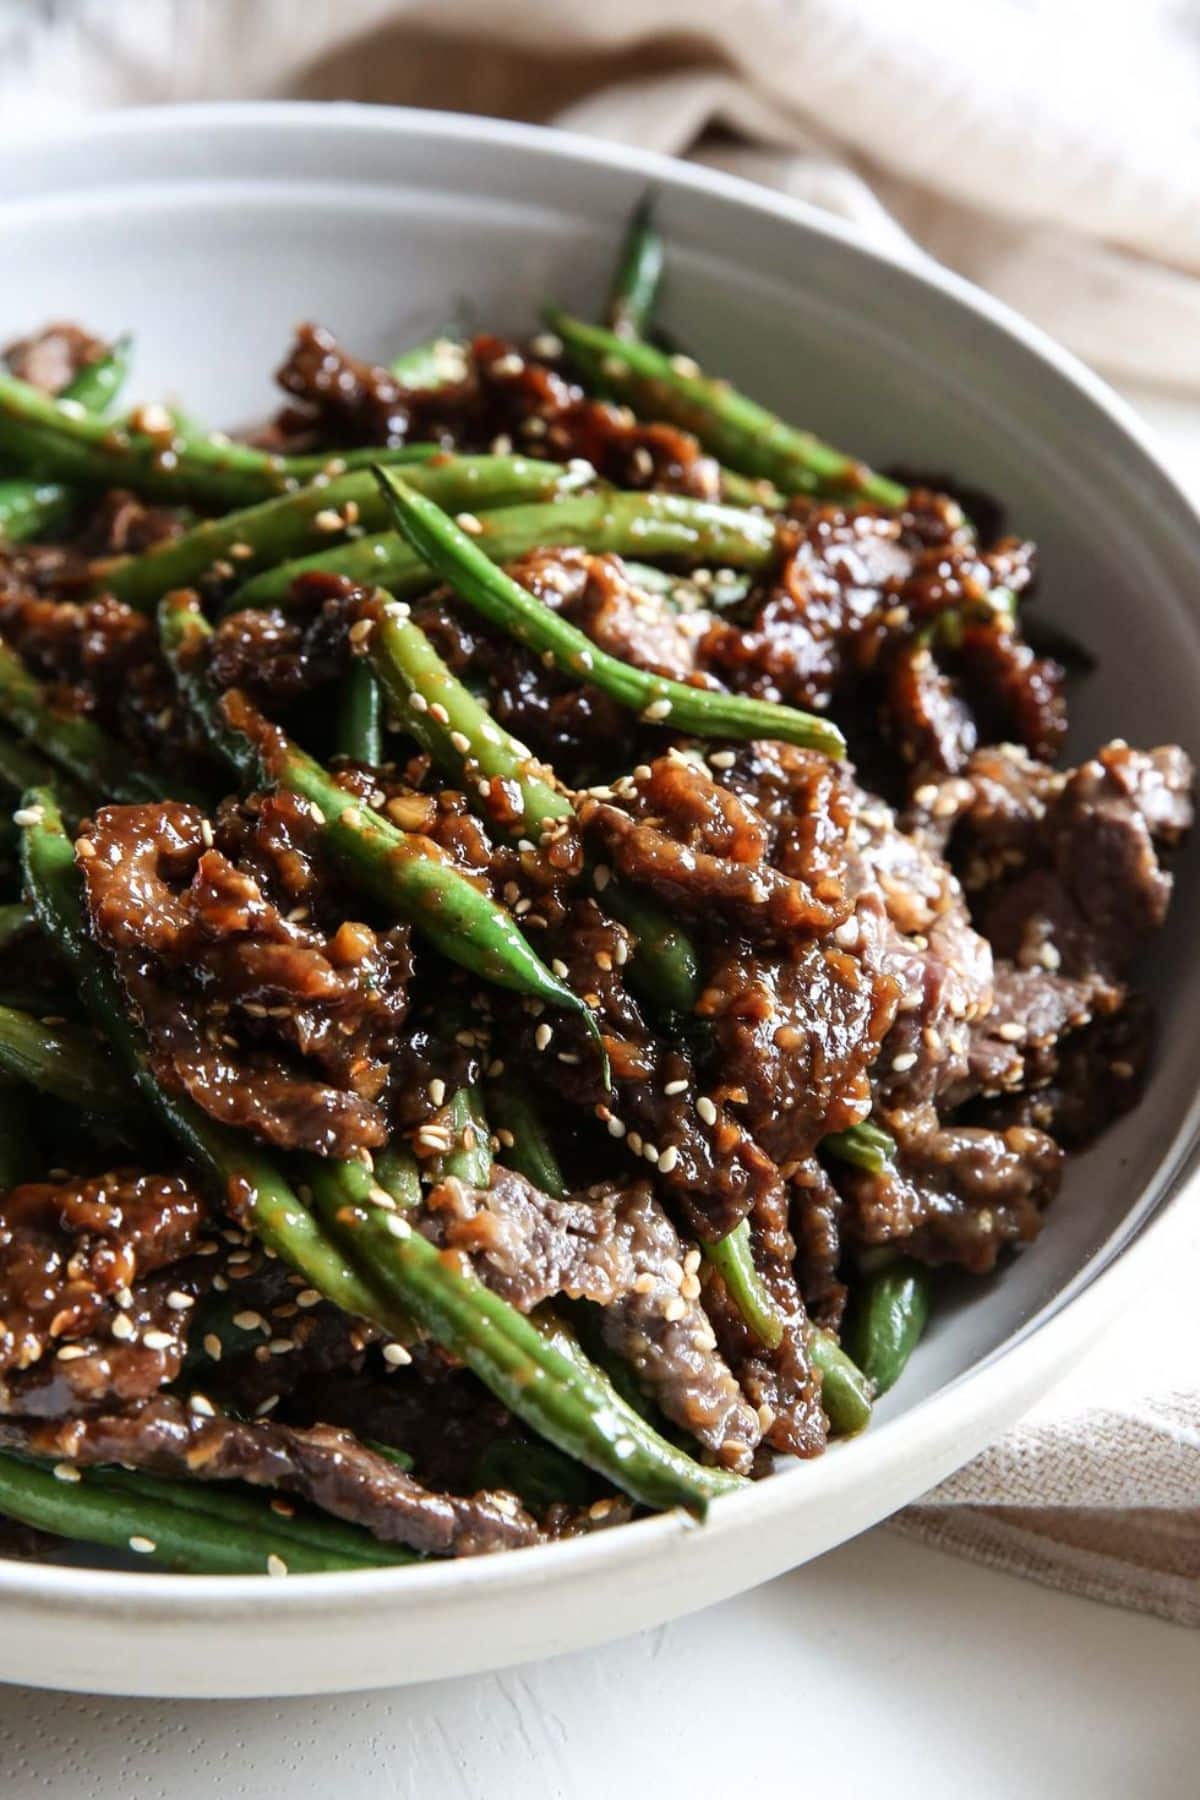 Juicy Sesame-Ginger Beef Stir Fry With Green Beans in a white bowl.